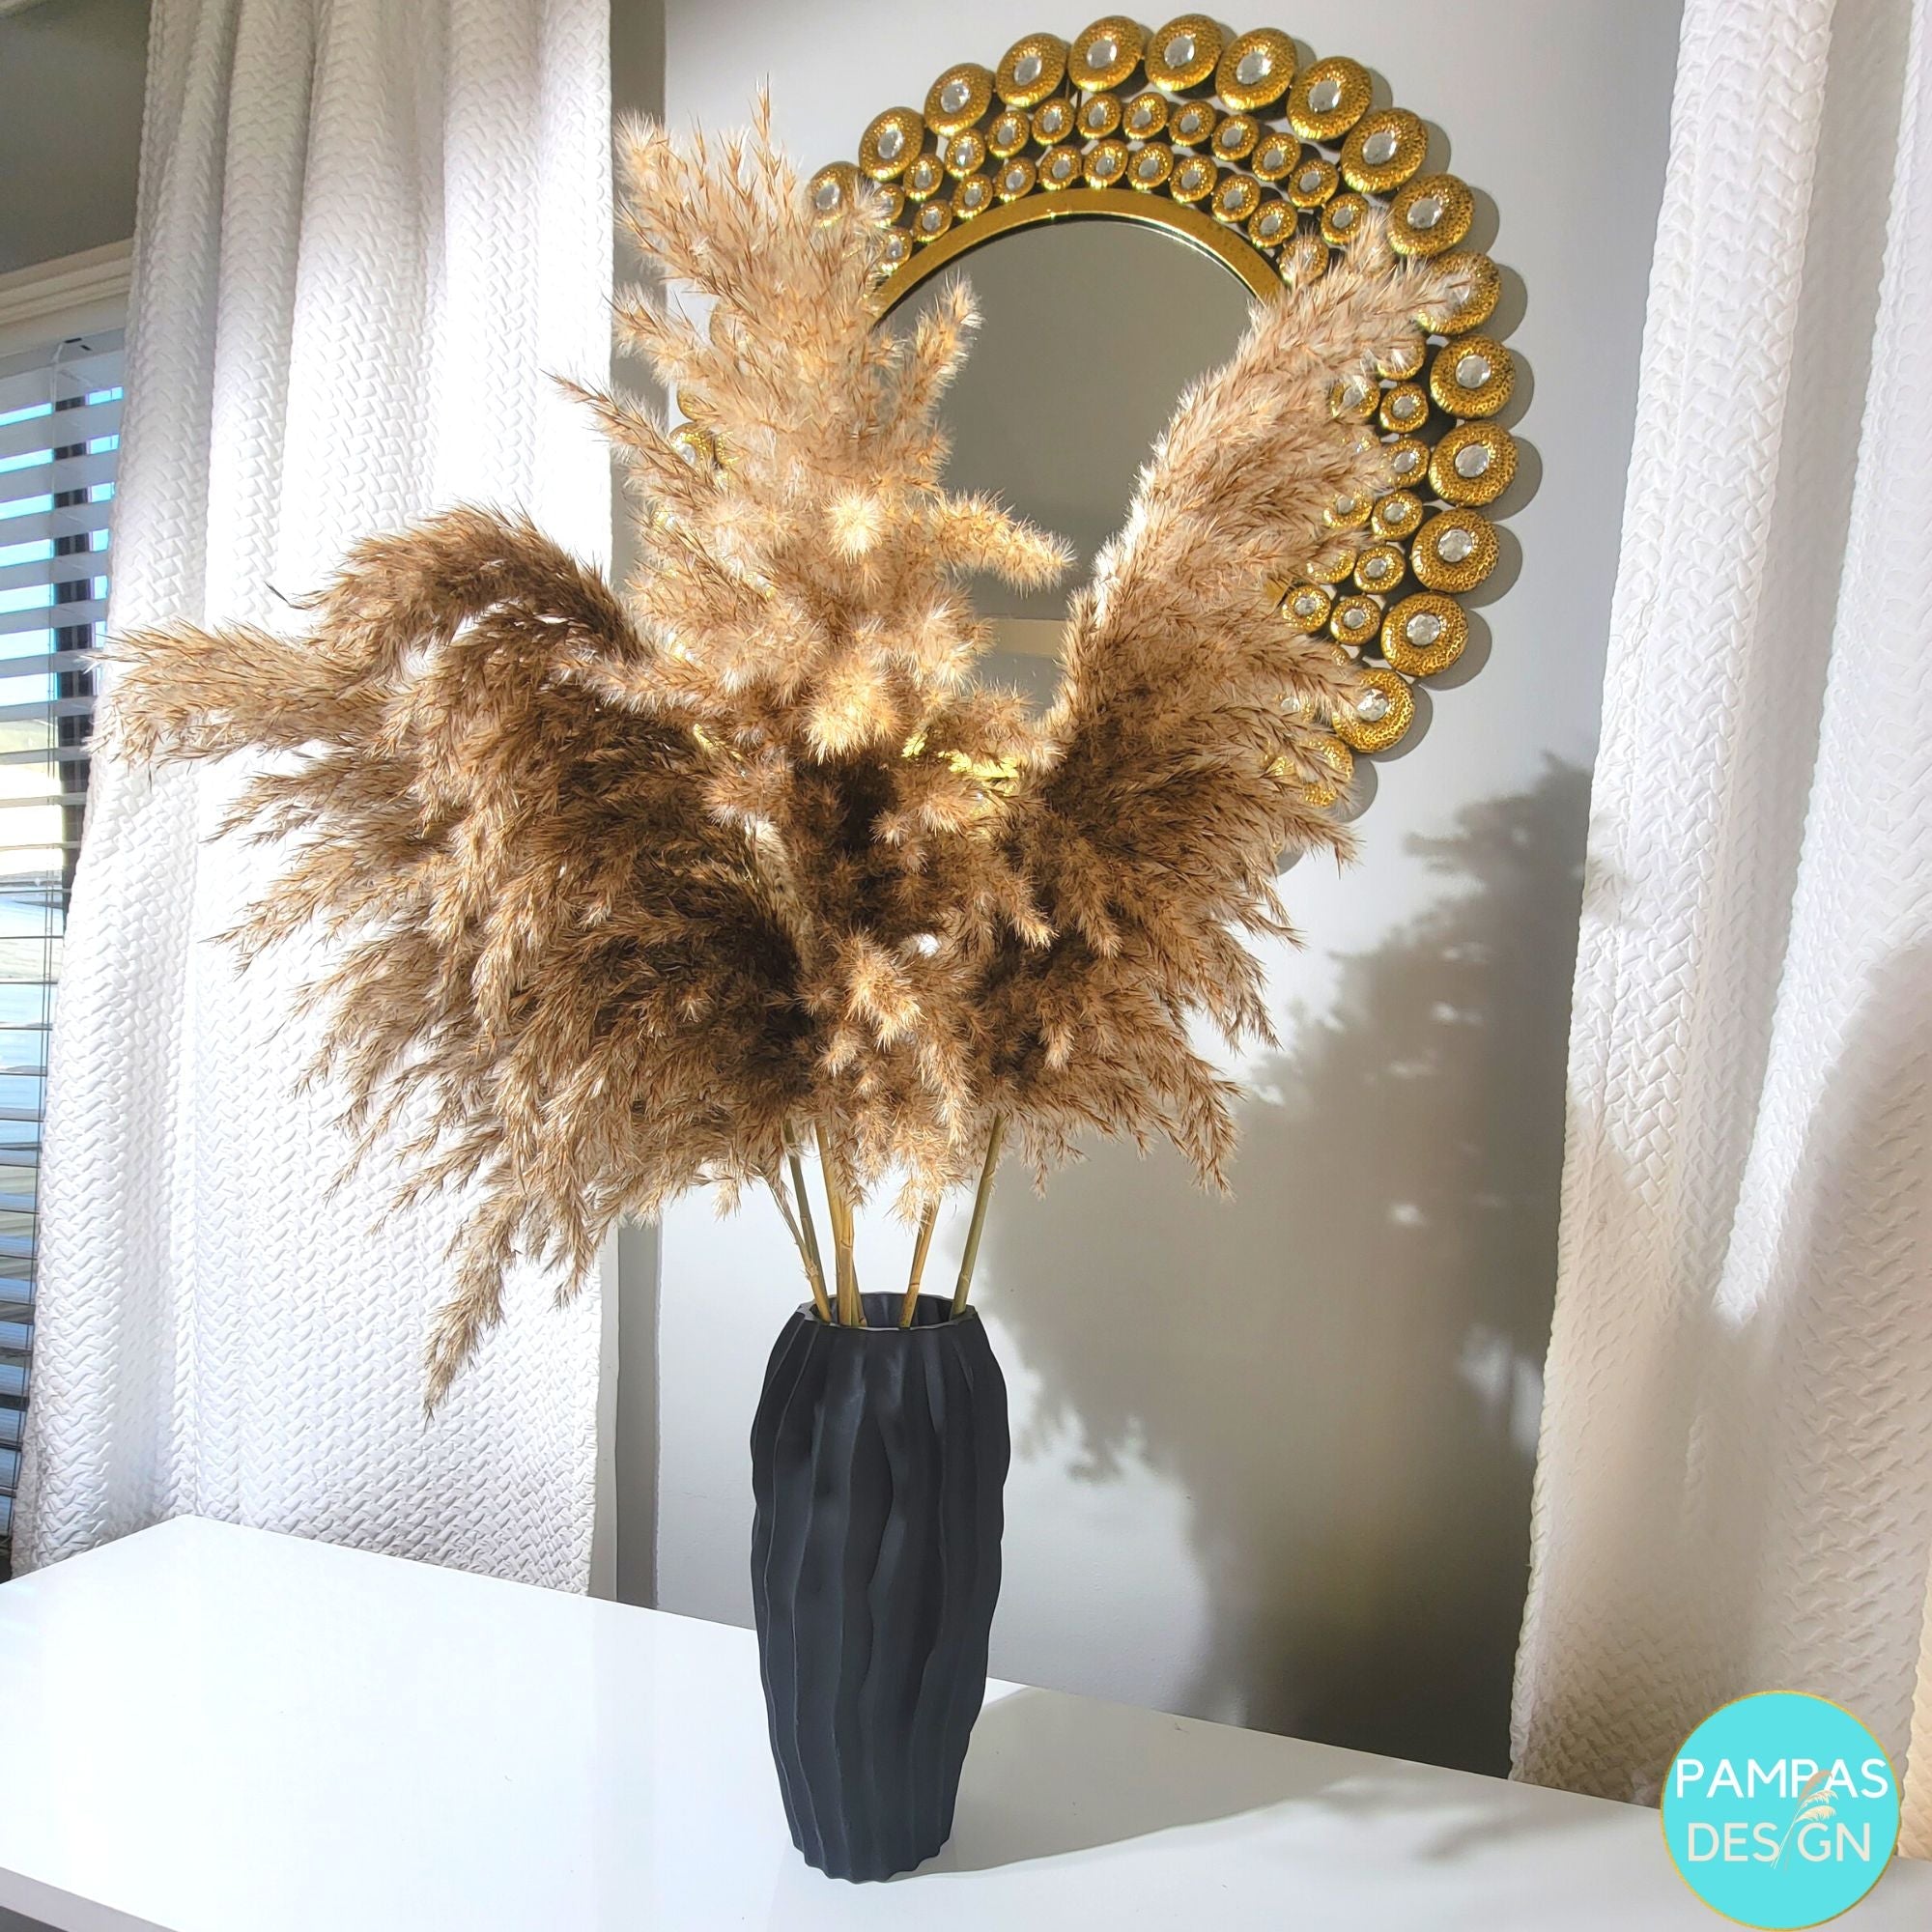 Set of 3 Pampas Grass Decor, White 48 Inches/4 feet Long Natural Dried  Pampas Grass, Decorative Feathers for vases Tall -Perfect for Indoor  Glance